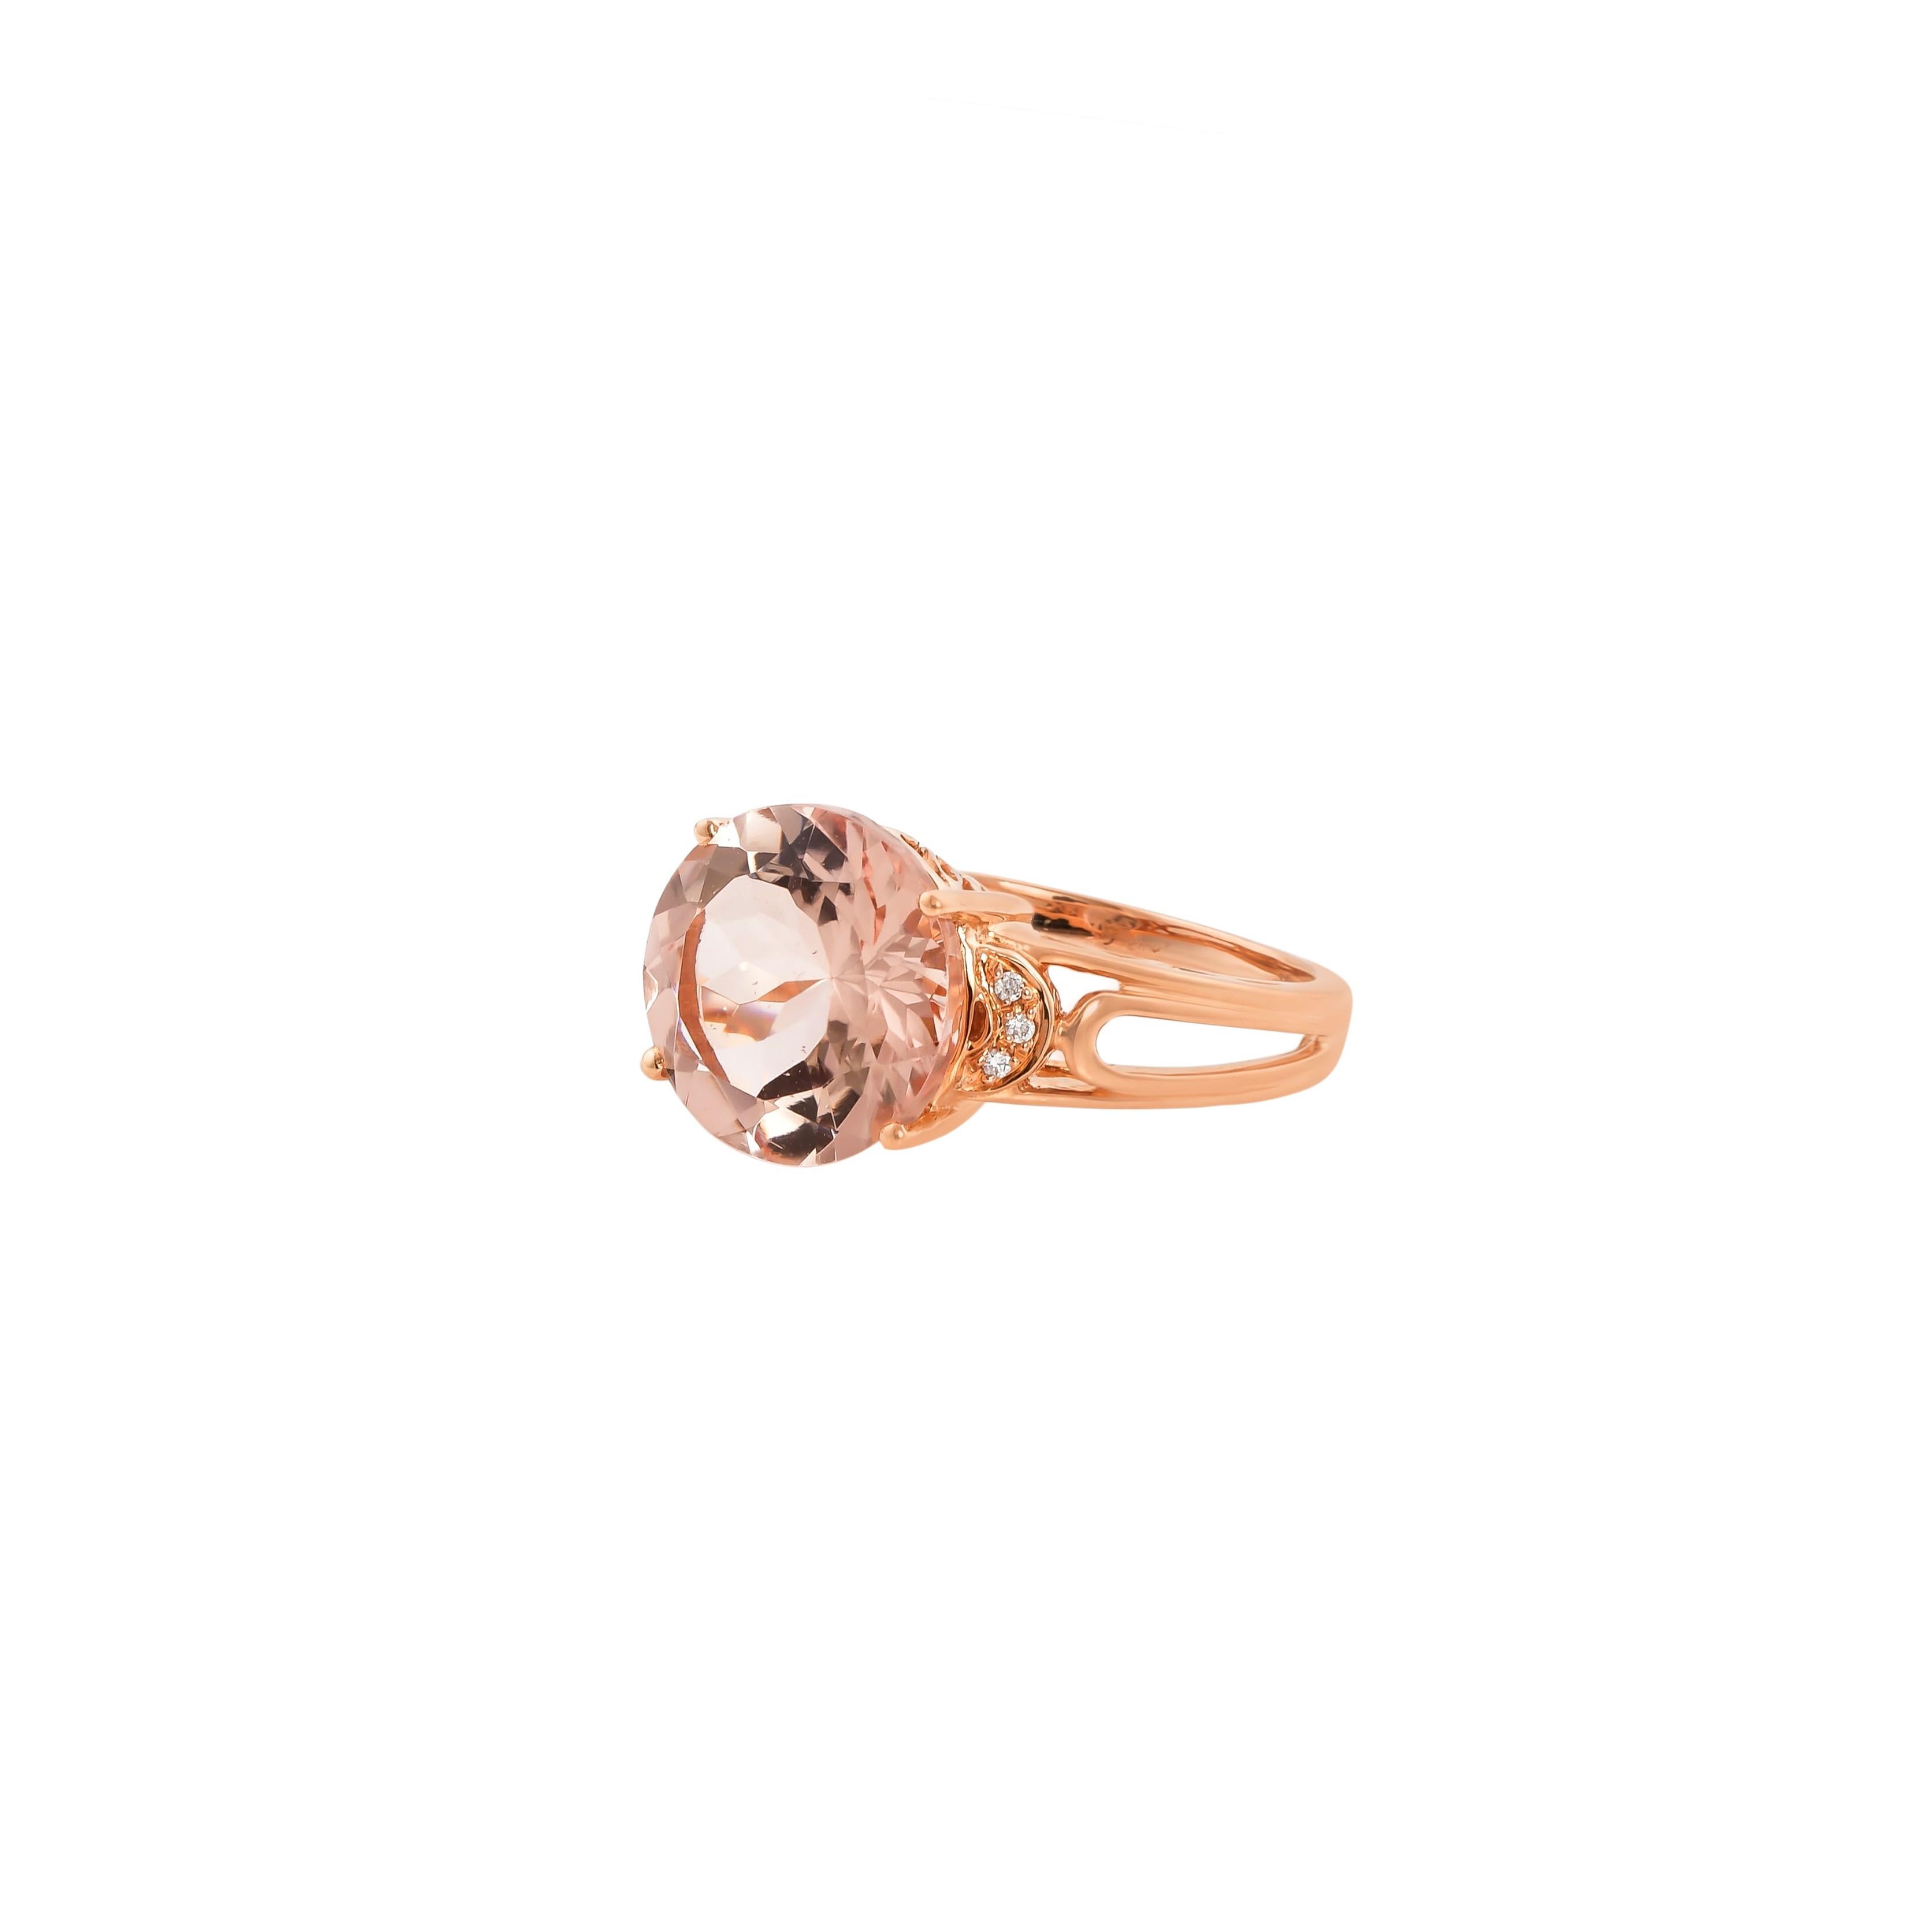 Contemporary 5.9 Carat Morganite and Diamond Ring in 18 Karat Rose Gold For Sale